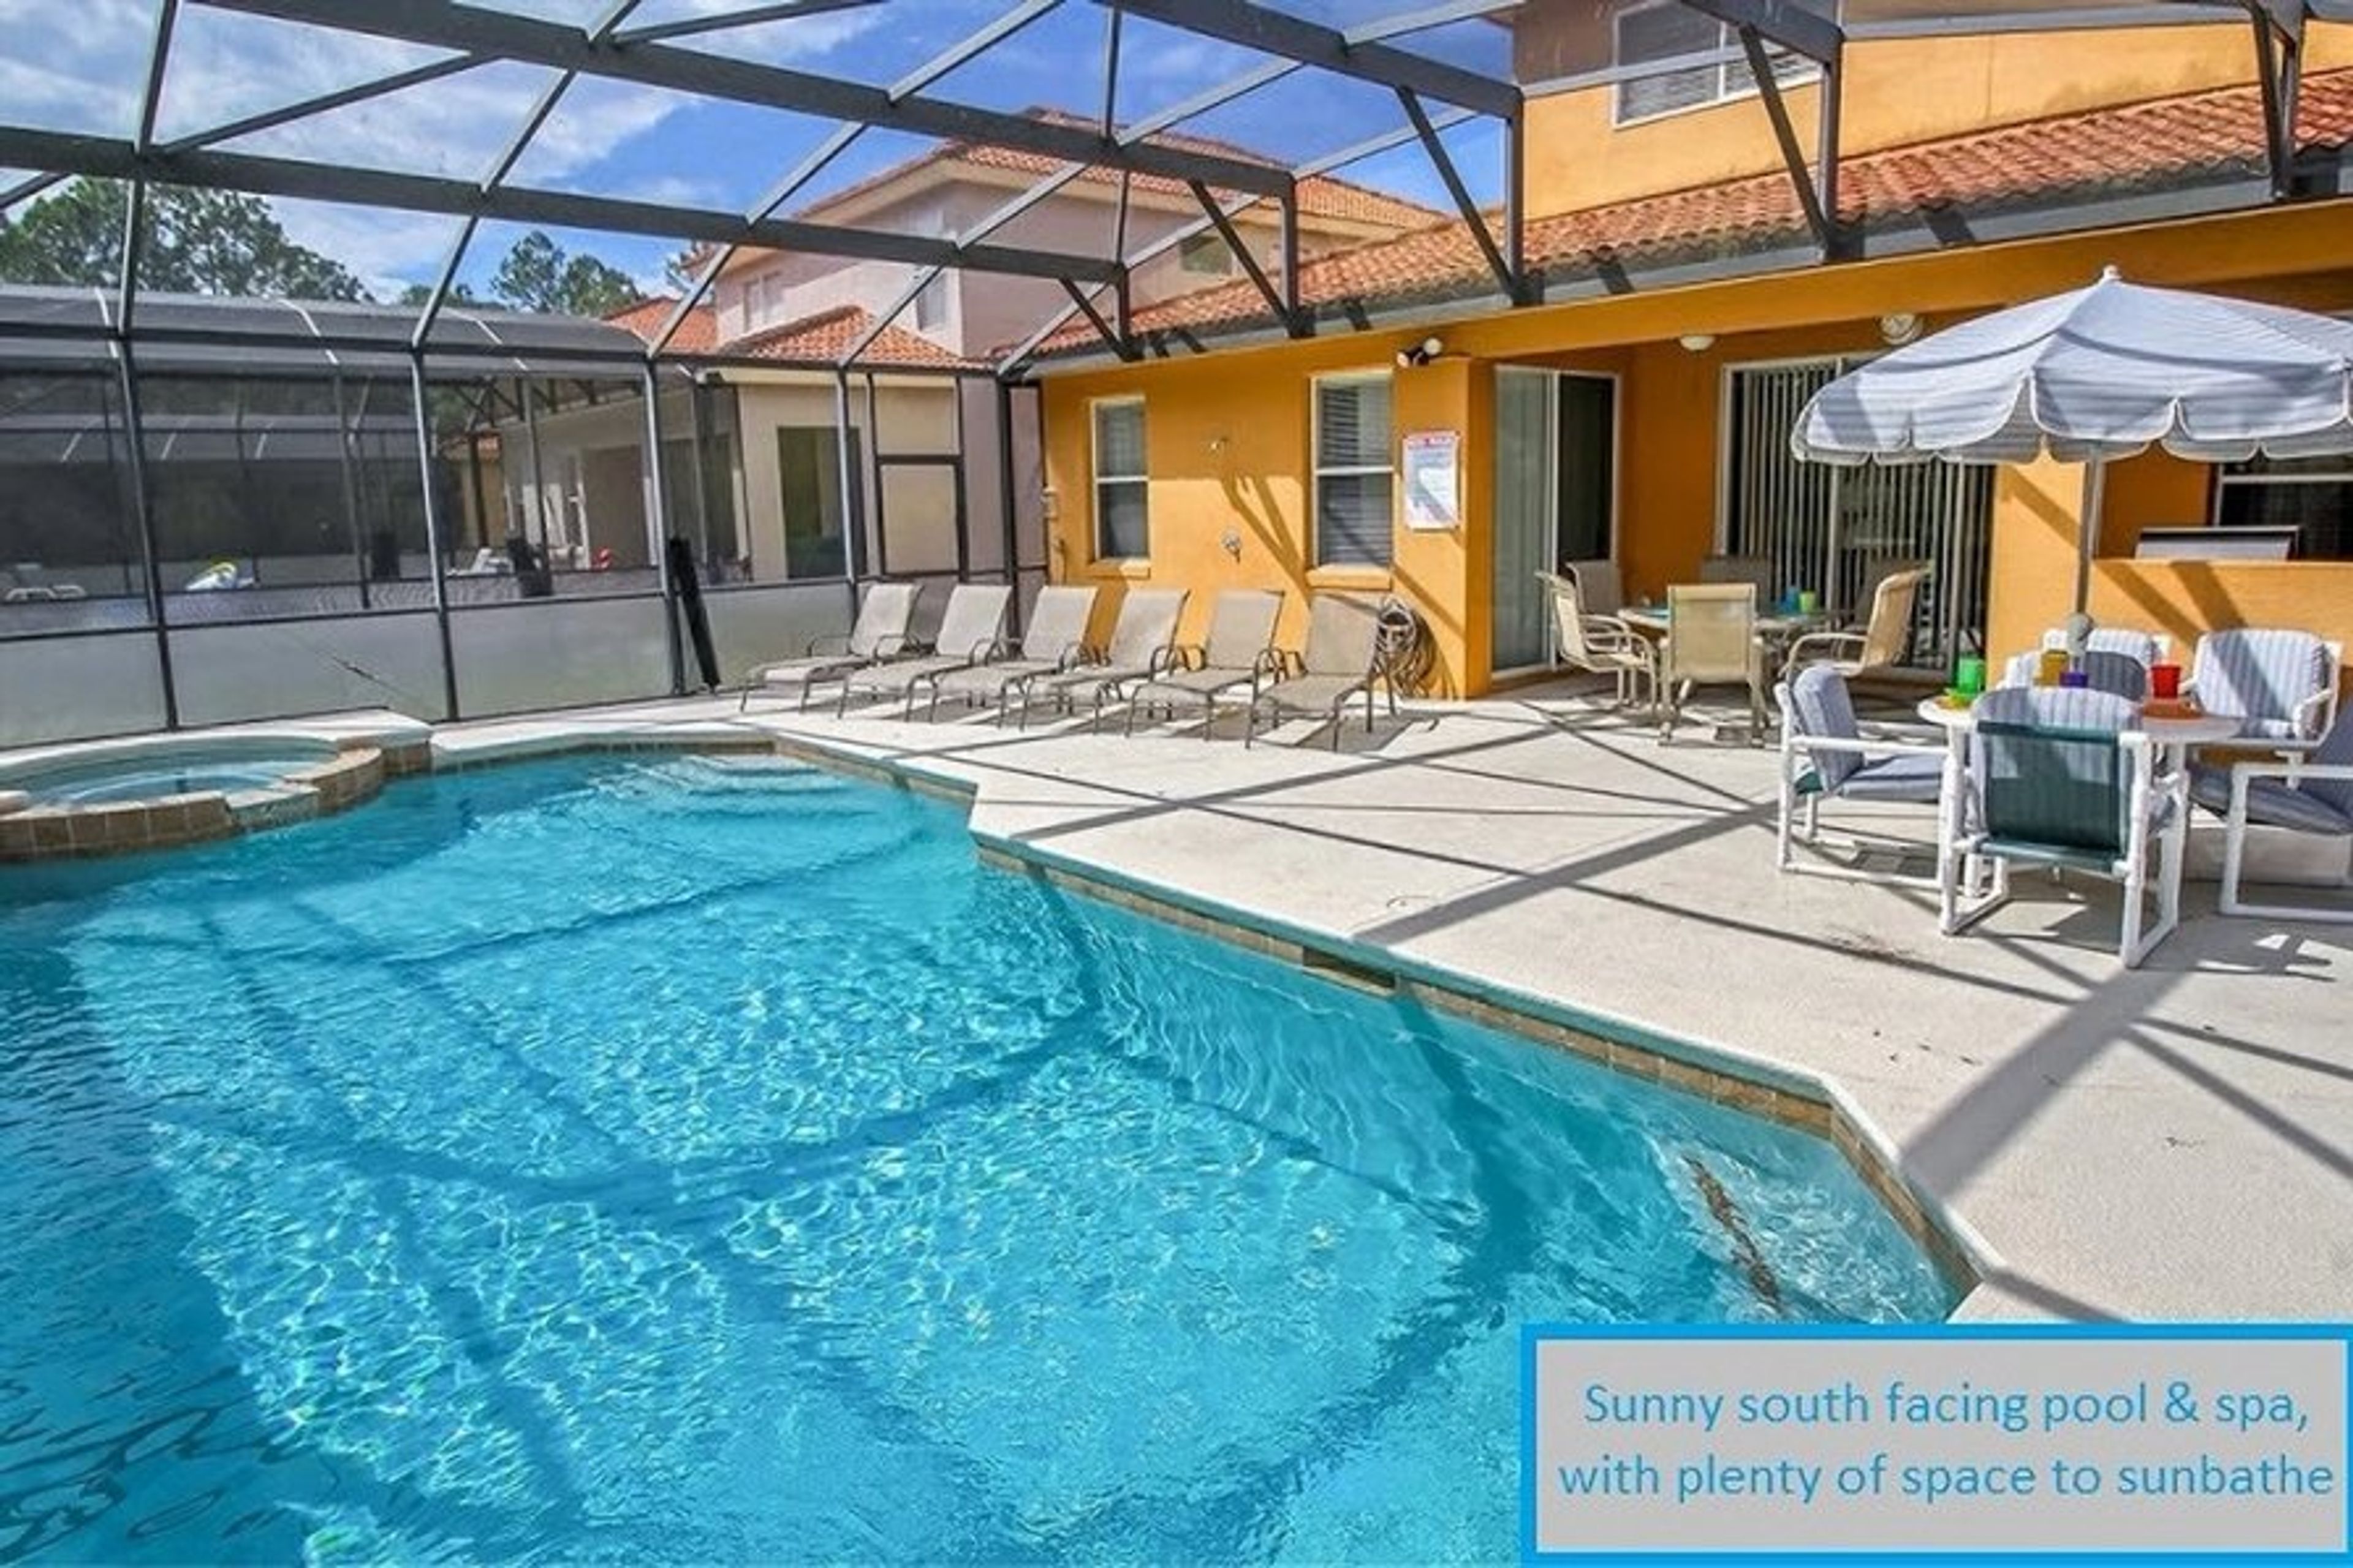 Sunny south facing pool & spa with spacious sunbathing area.